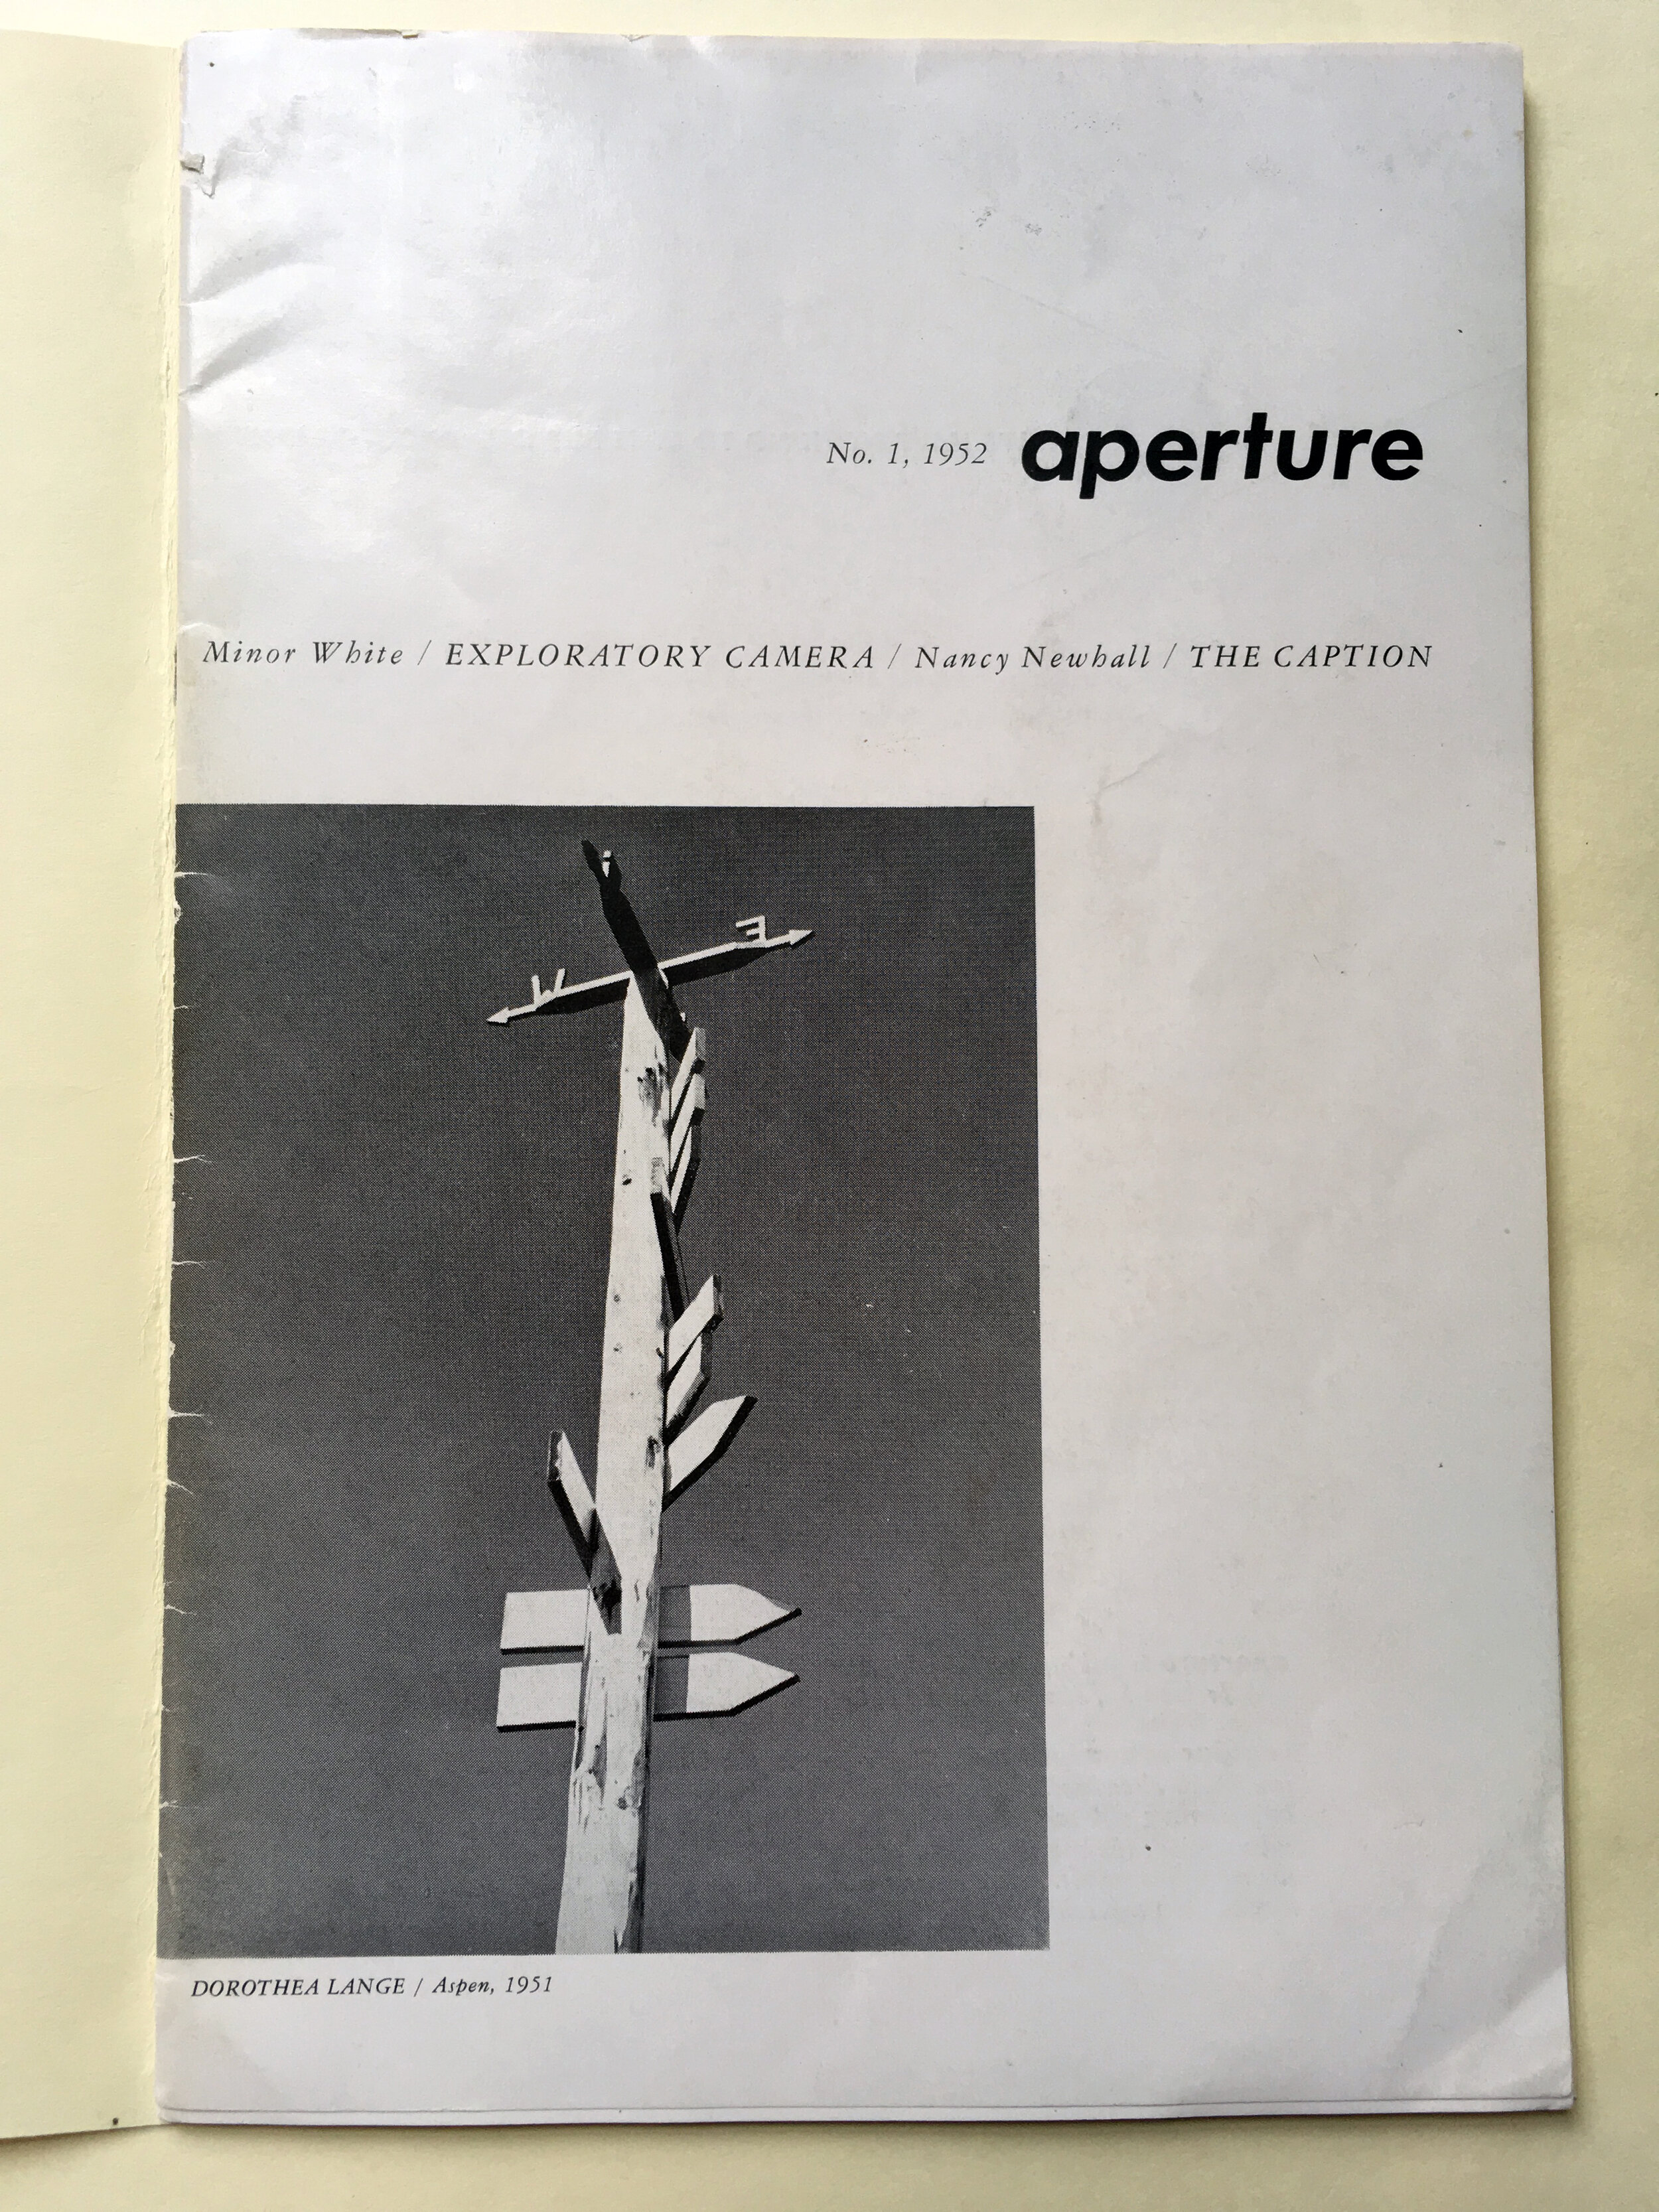    Aperture , Vol. 1, No. 1 (1952), Aperture Foundation Master Library Collection.  